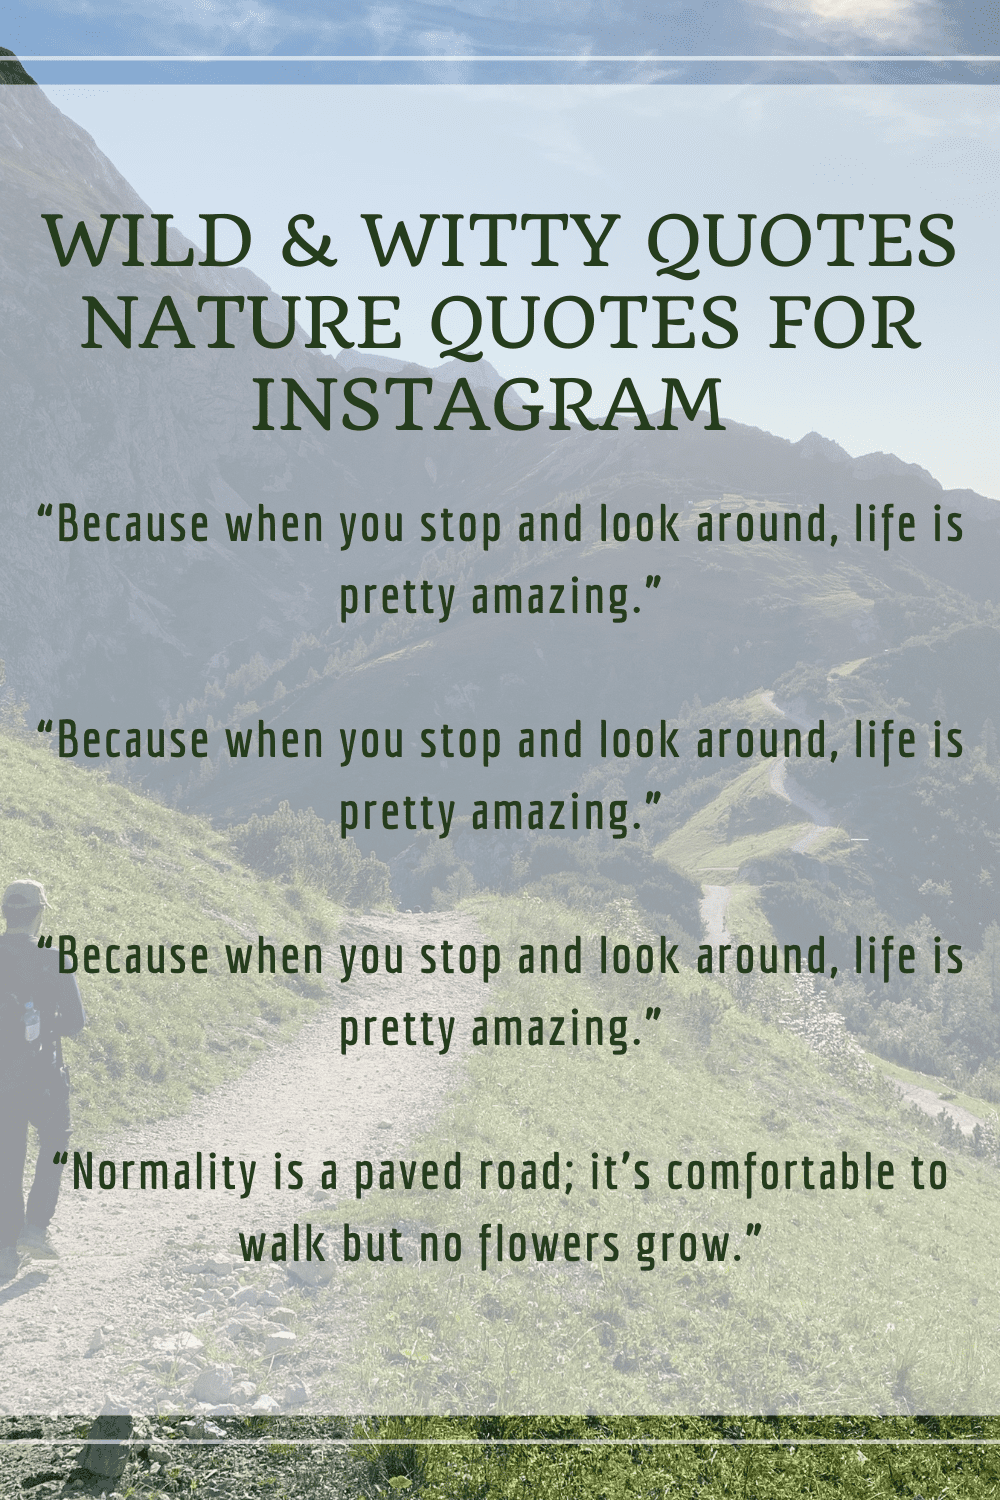 Wild & Witty Quotes Nature Quotes